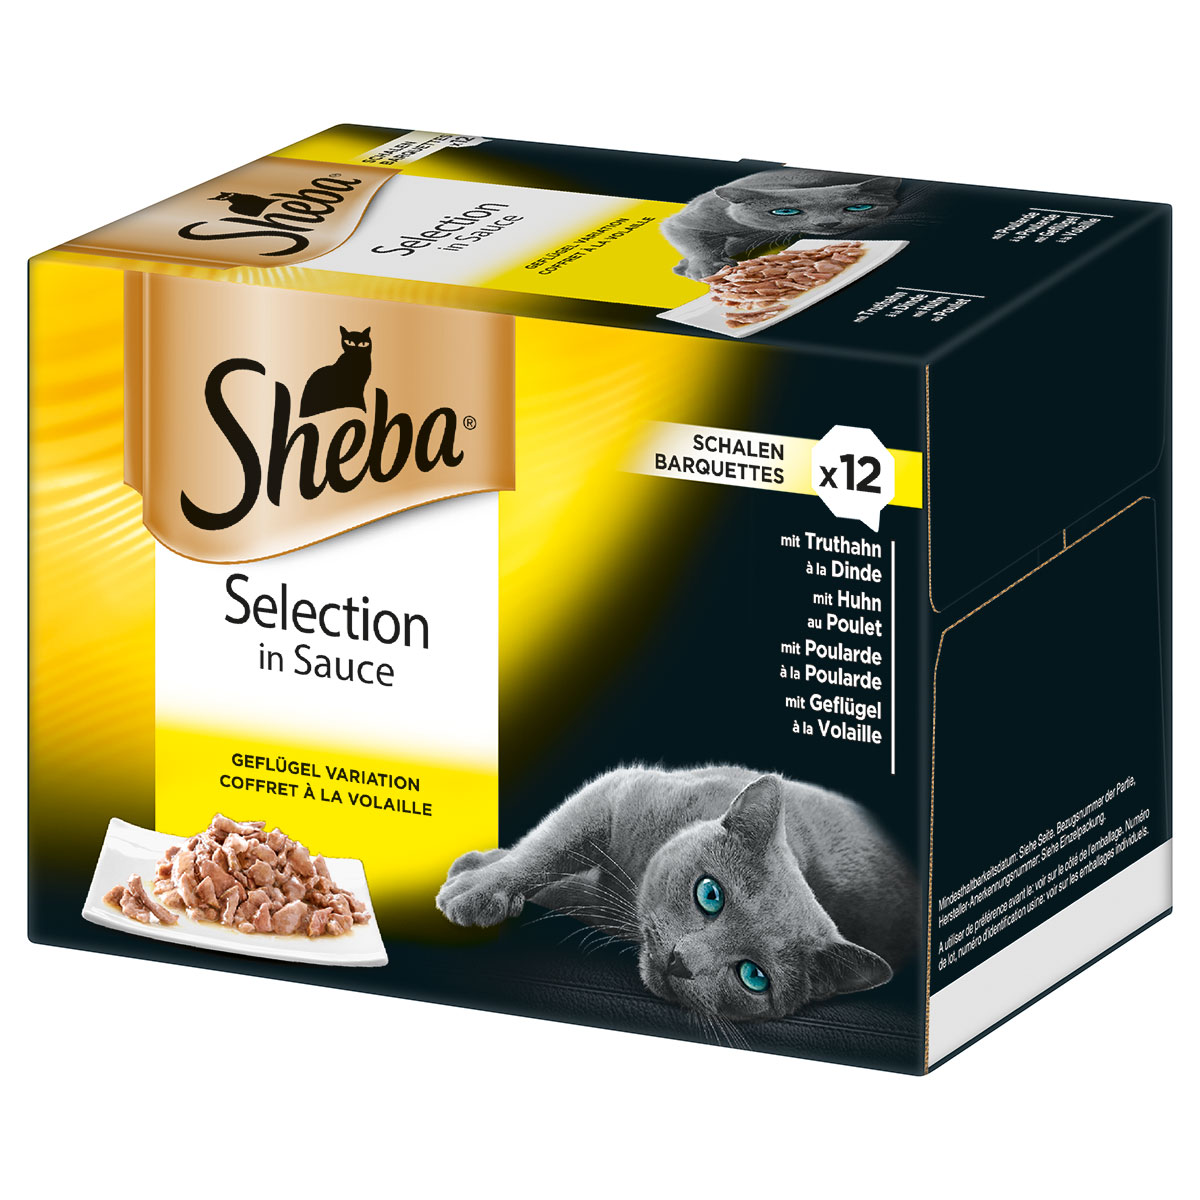 sheba selection in sauce schale multipack